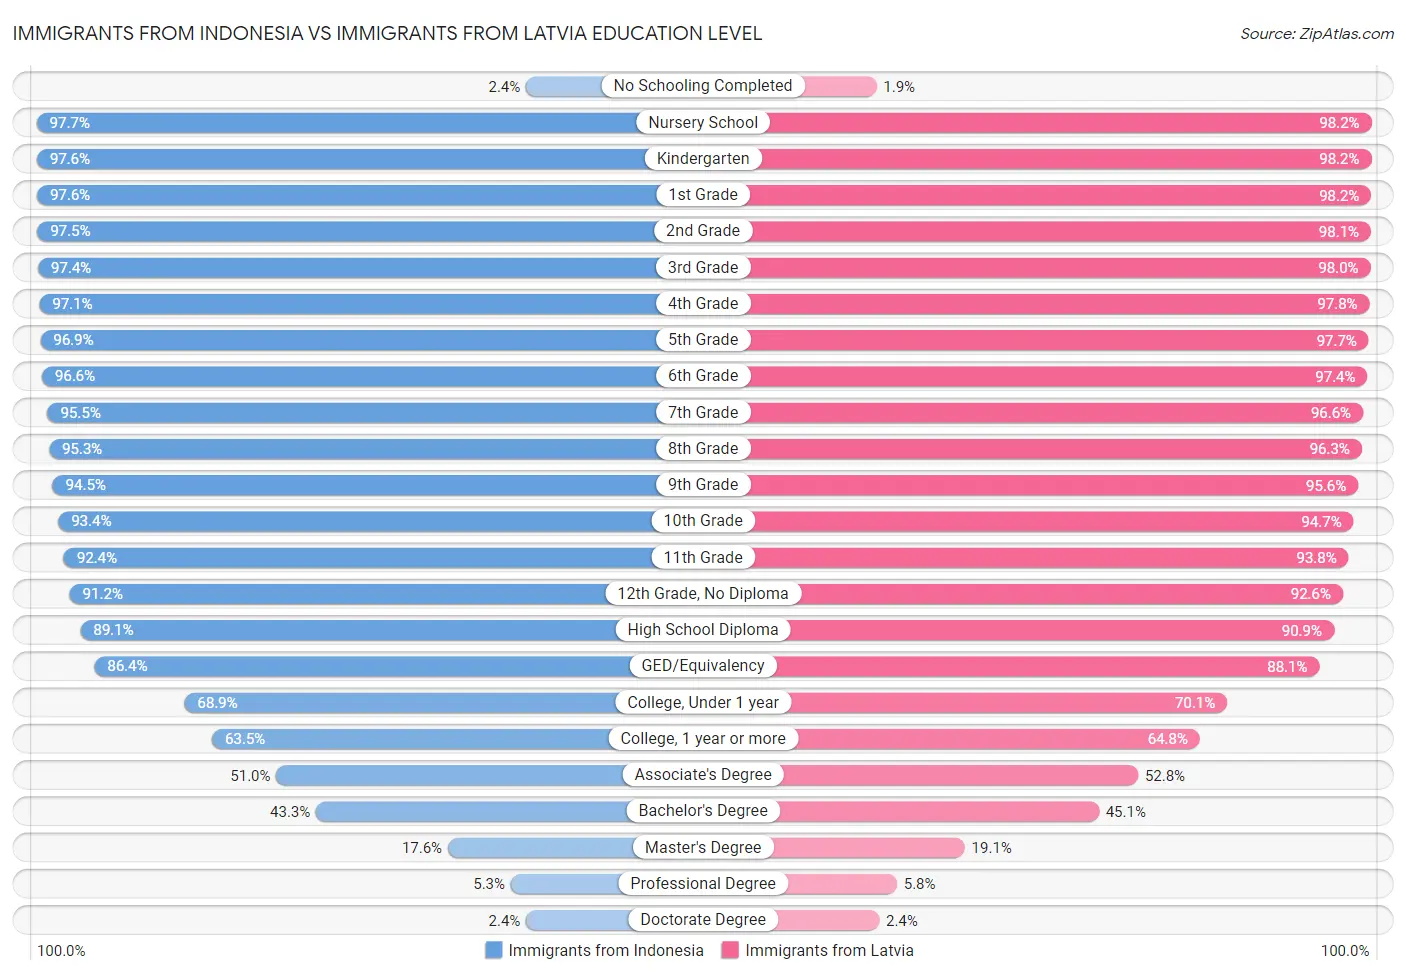 Immigrants from Indonesia vs Immigrants from Latvia Education Level